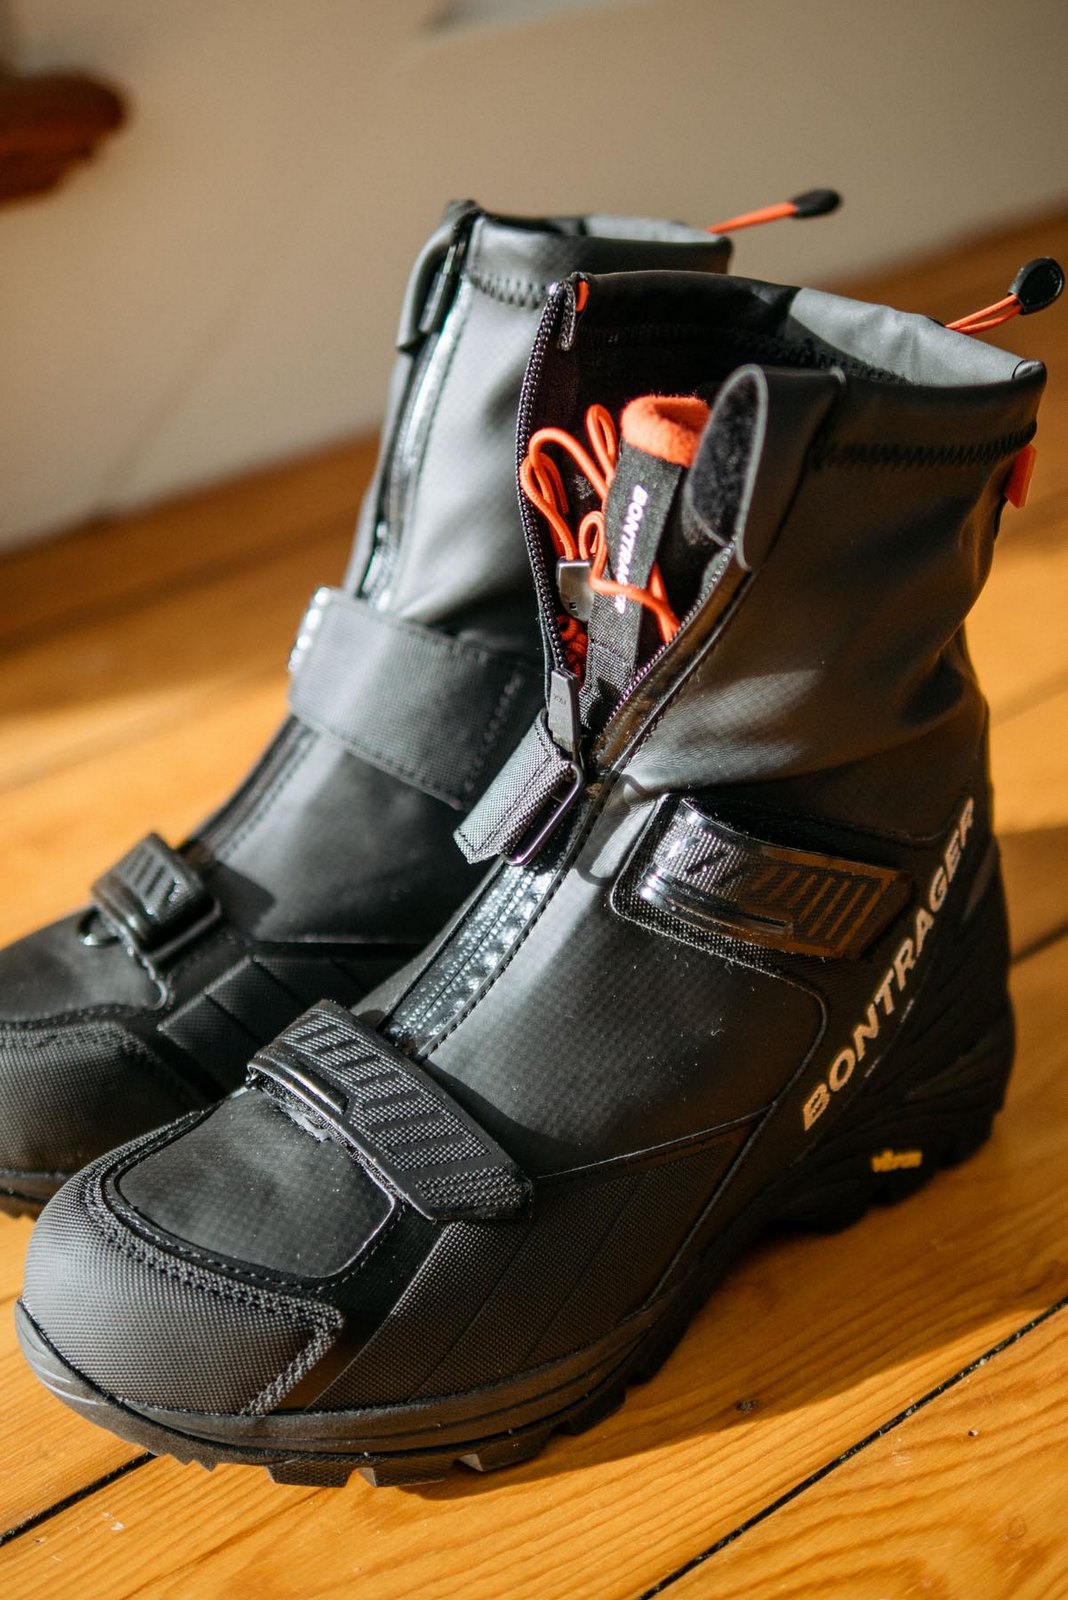 bontrager-omw-review-winter-cycling-boots_3.jpg